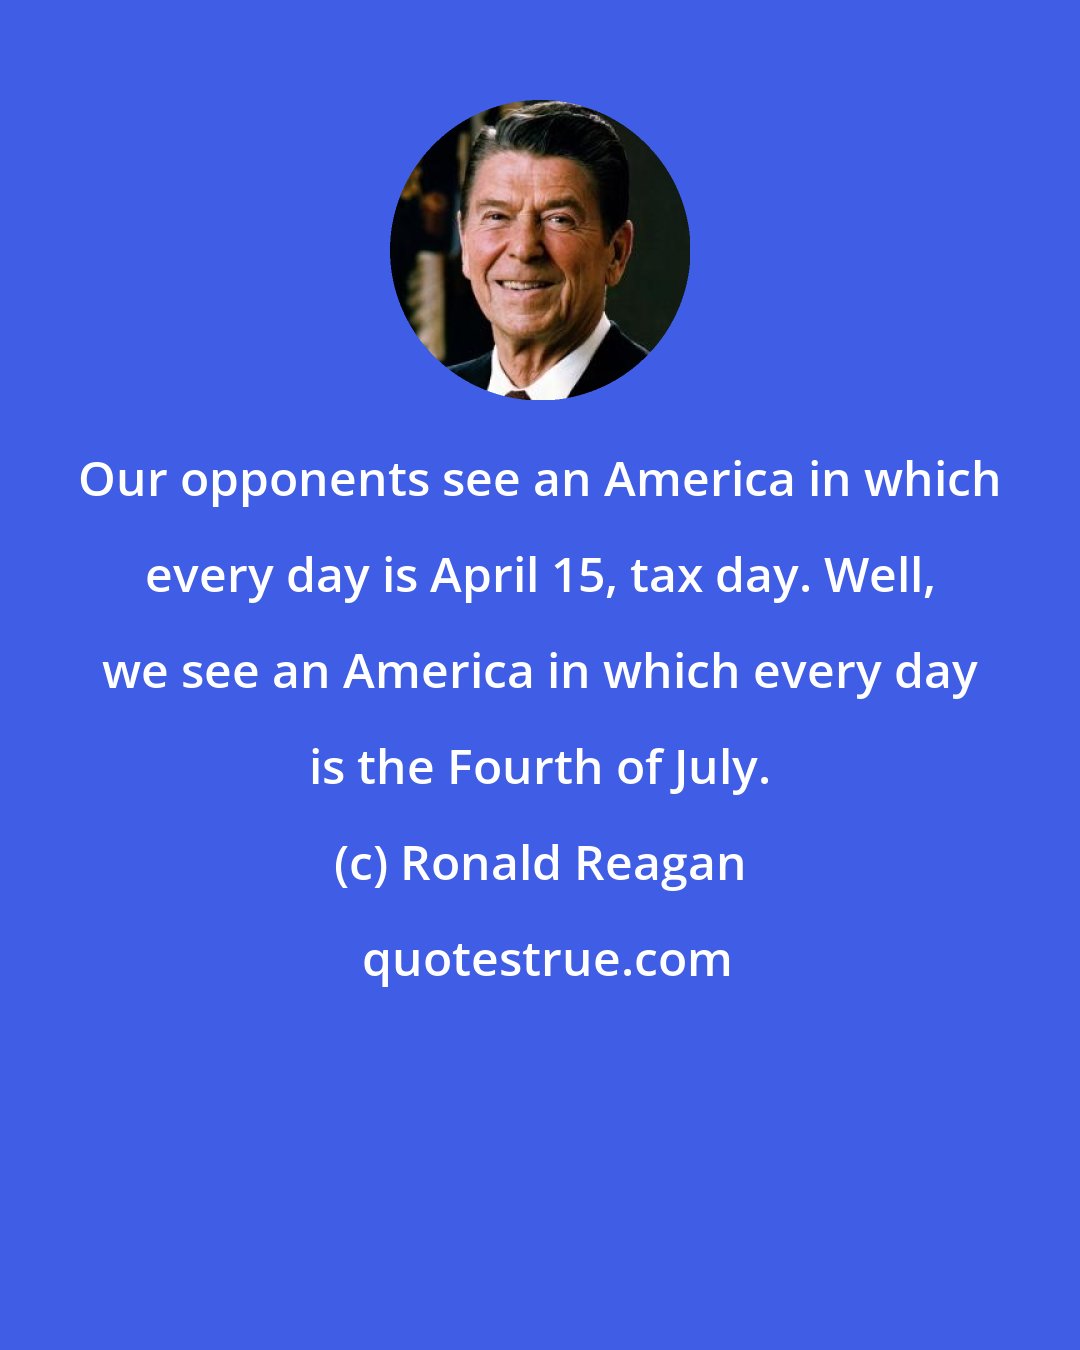 Ronald Reagan: Our opponents see an America in which every day is April 15, tax day. Well, we see an America in which every day is the Fourth of July.